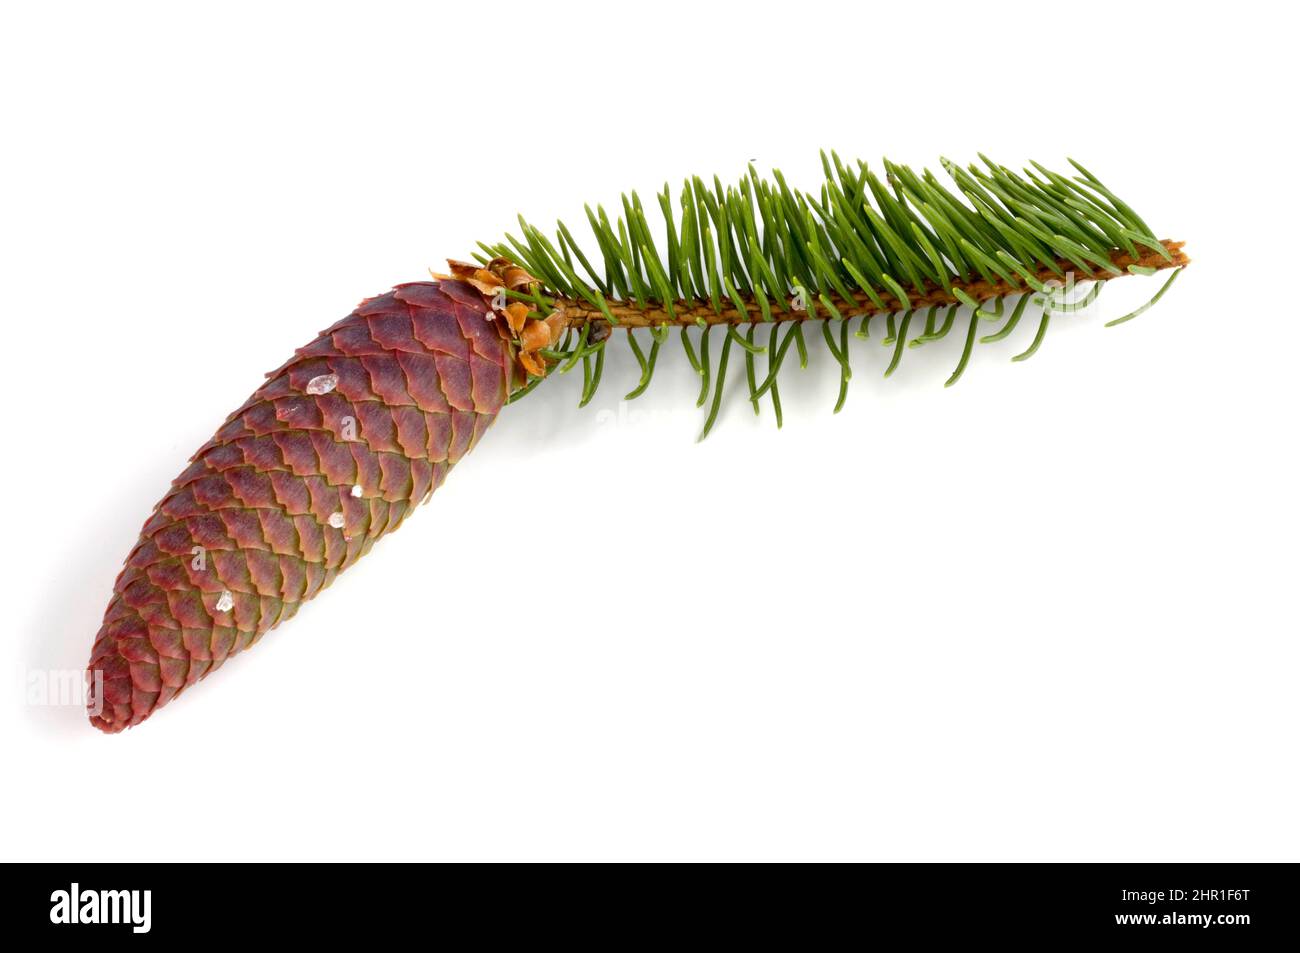 Norway spruce (Picea abies), branch with cone, cut out Stock Photo